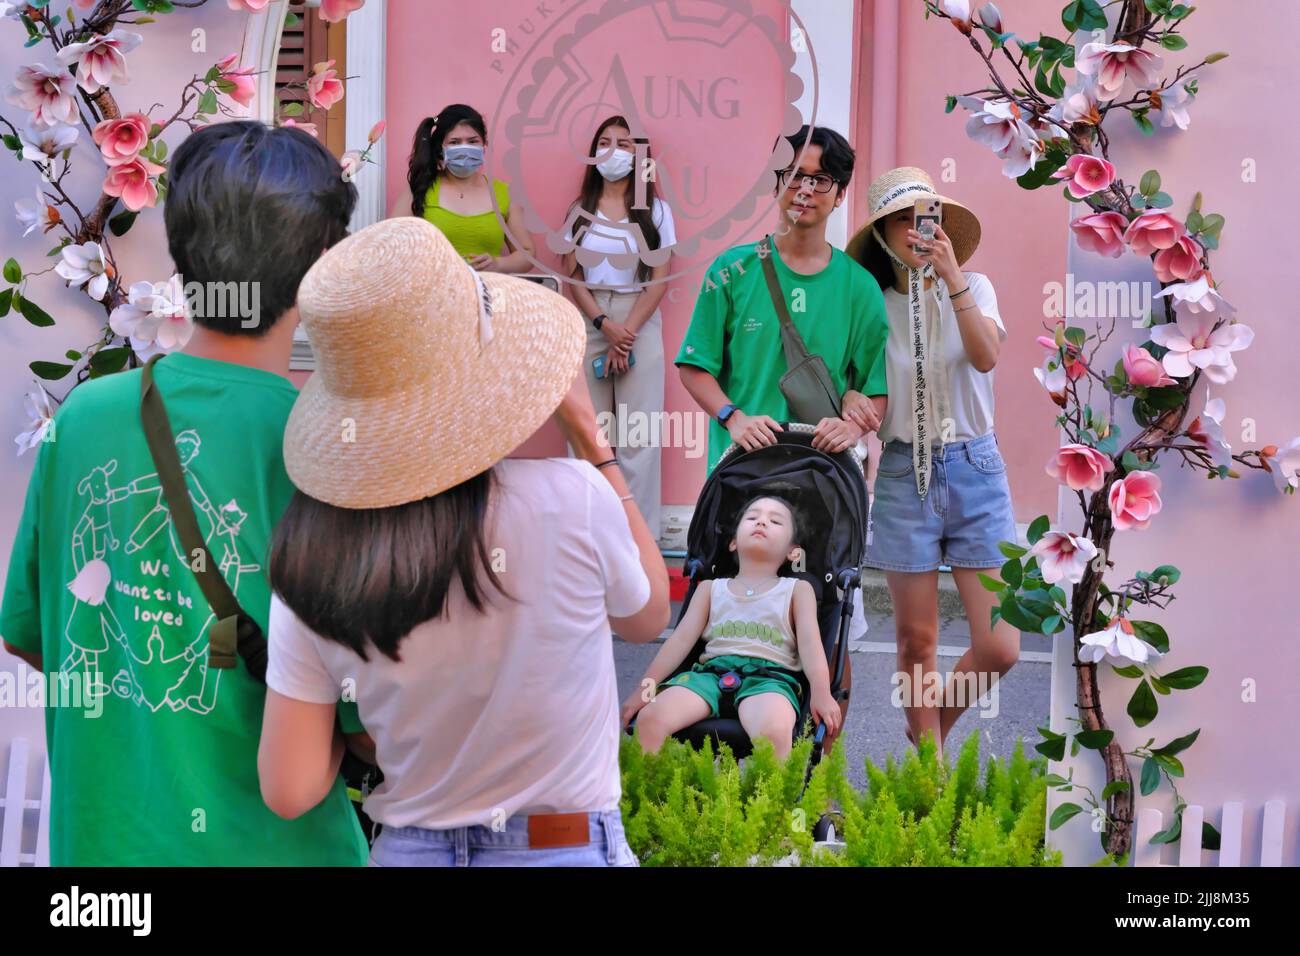 Young Asian tourists pose for selfies at a one-way mirror window of Aung Ku Cafe in Soi Rommanee in the Old Town area of Phuket Town, Thailand Stock Photo